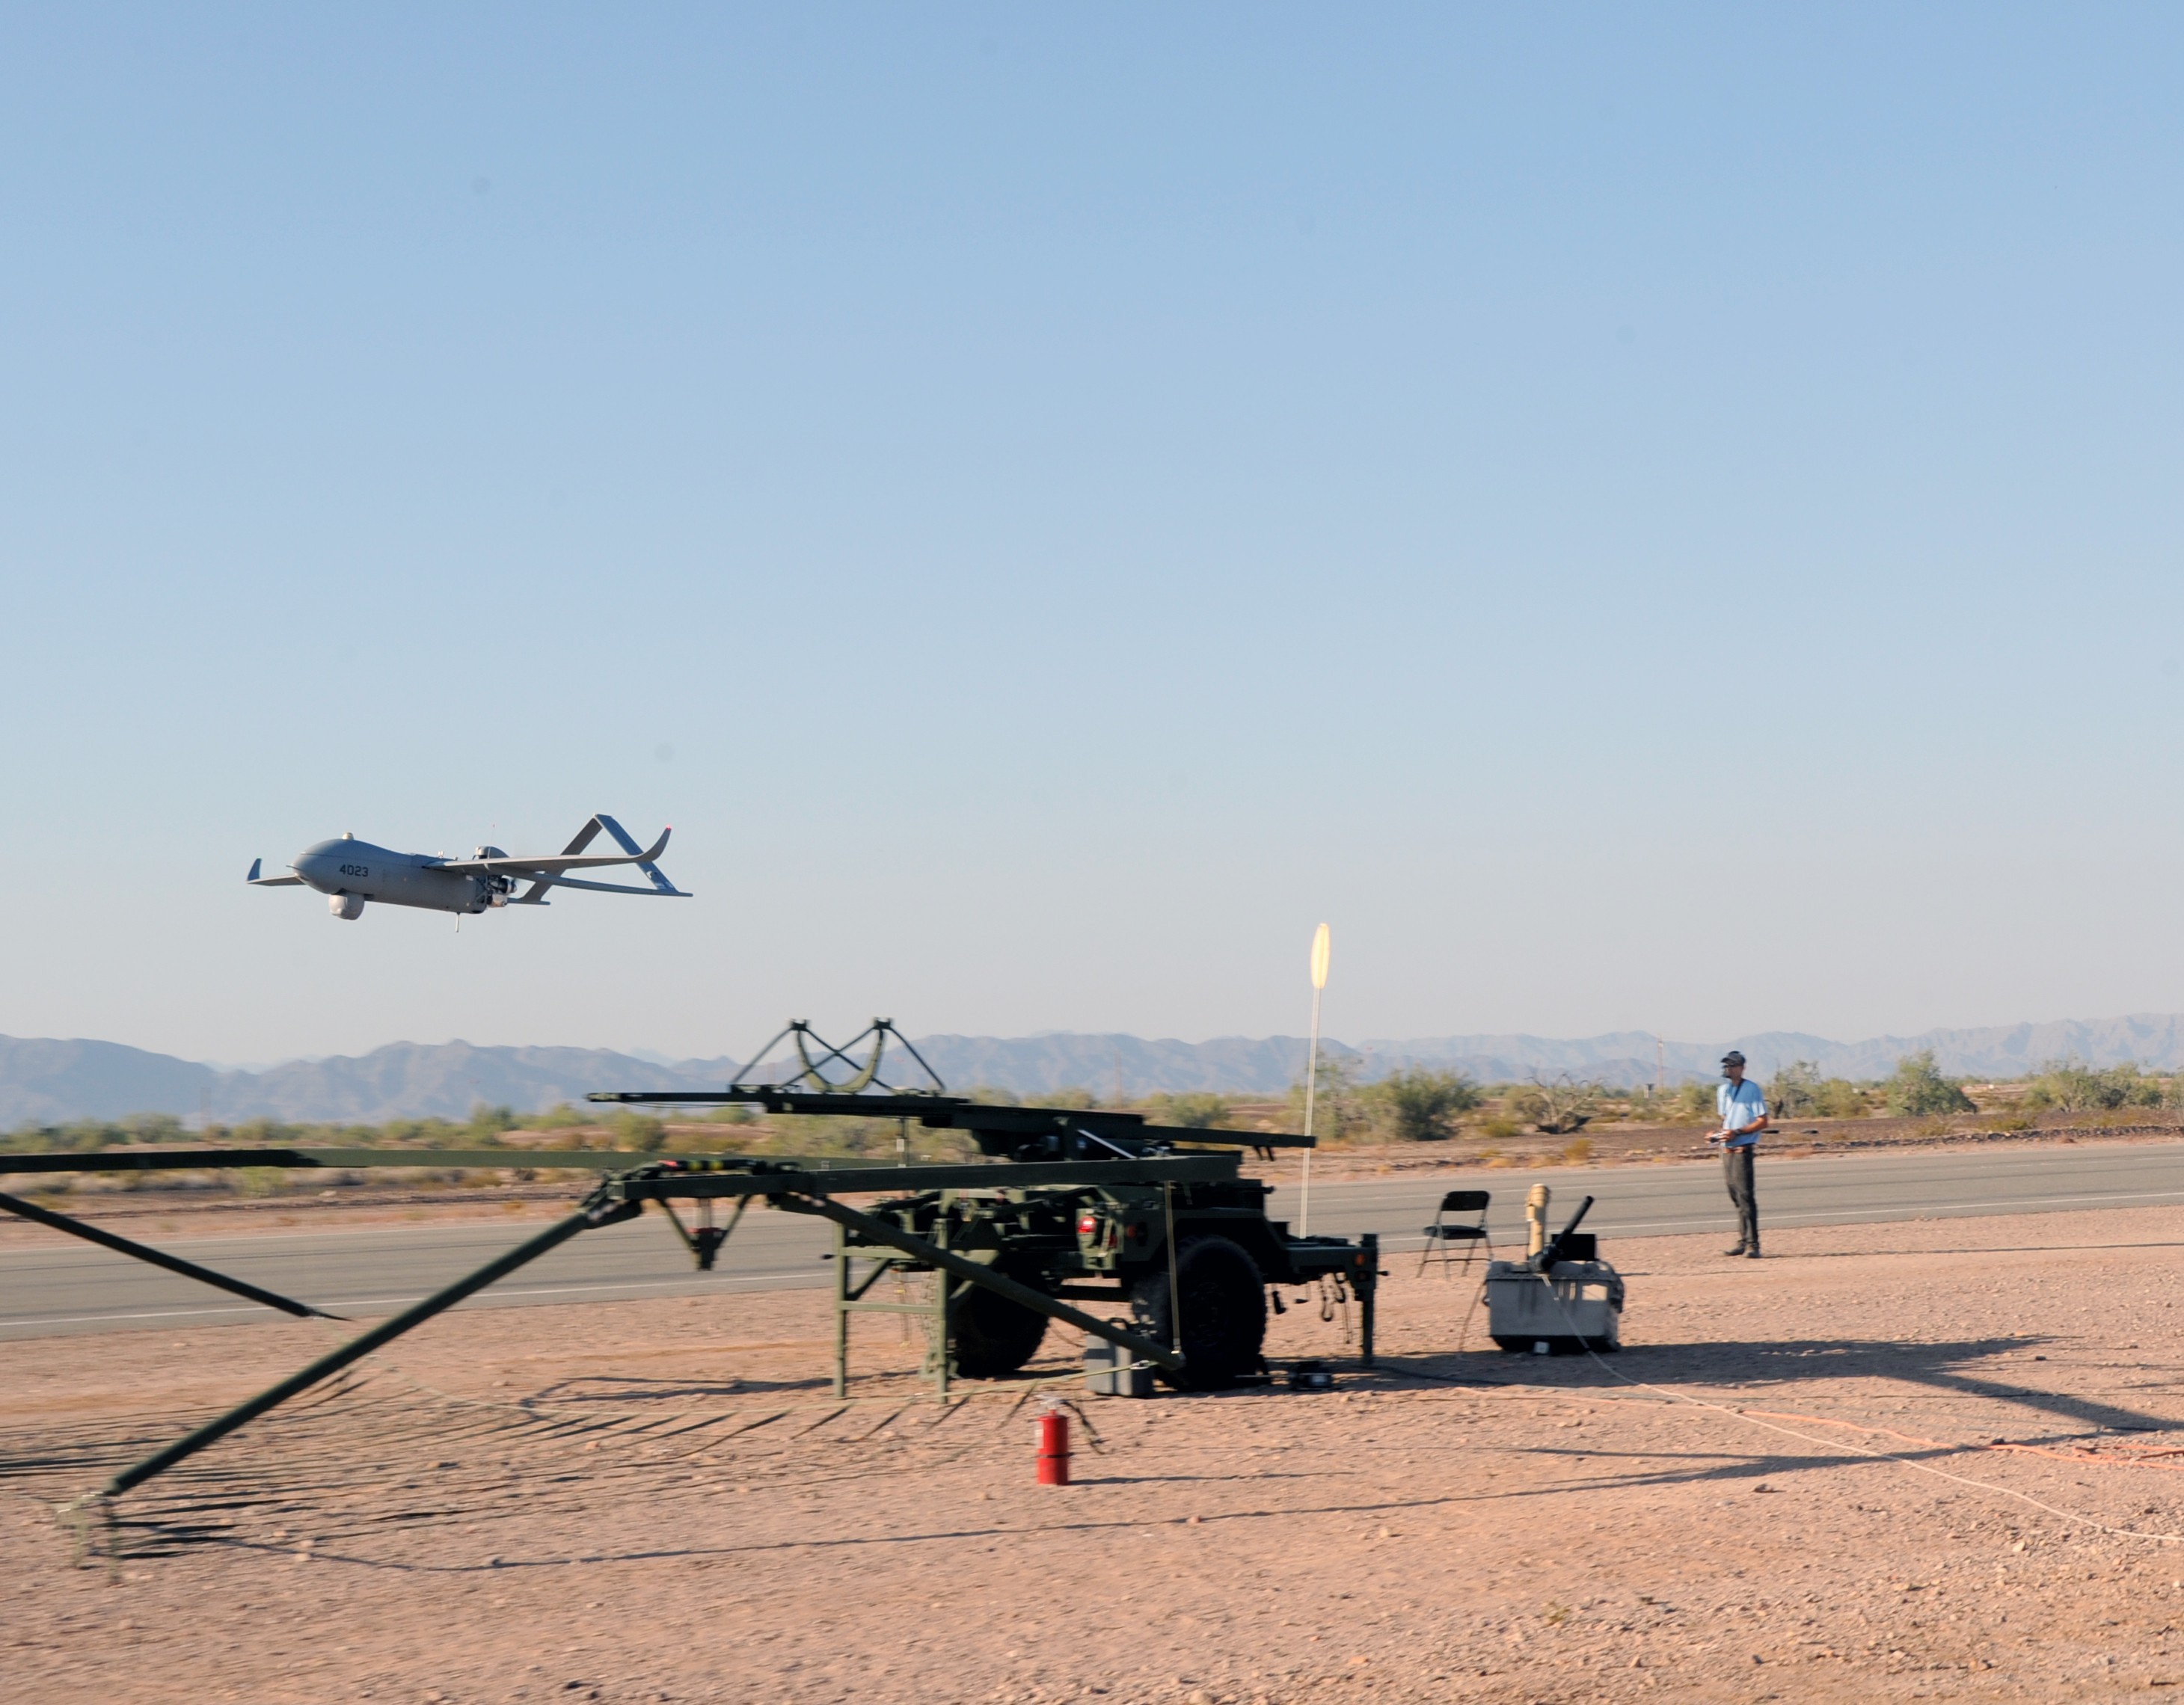 US Army Tests Versatile Unmanned Aircraft at Yuma Proving Ground